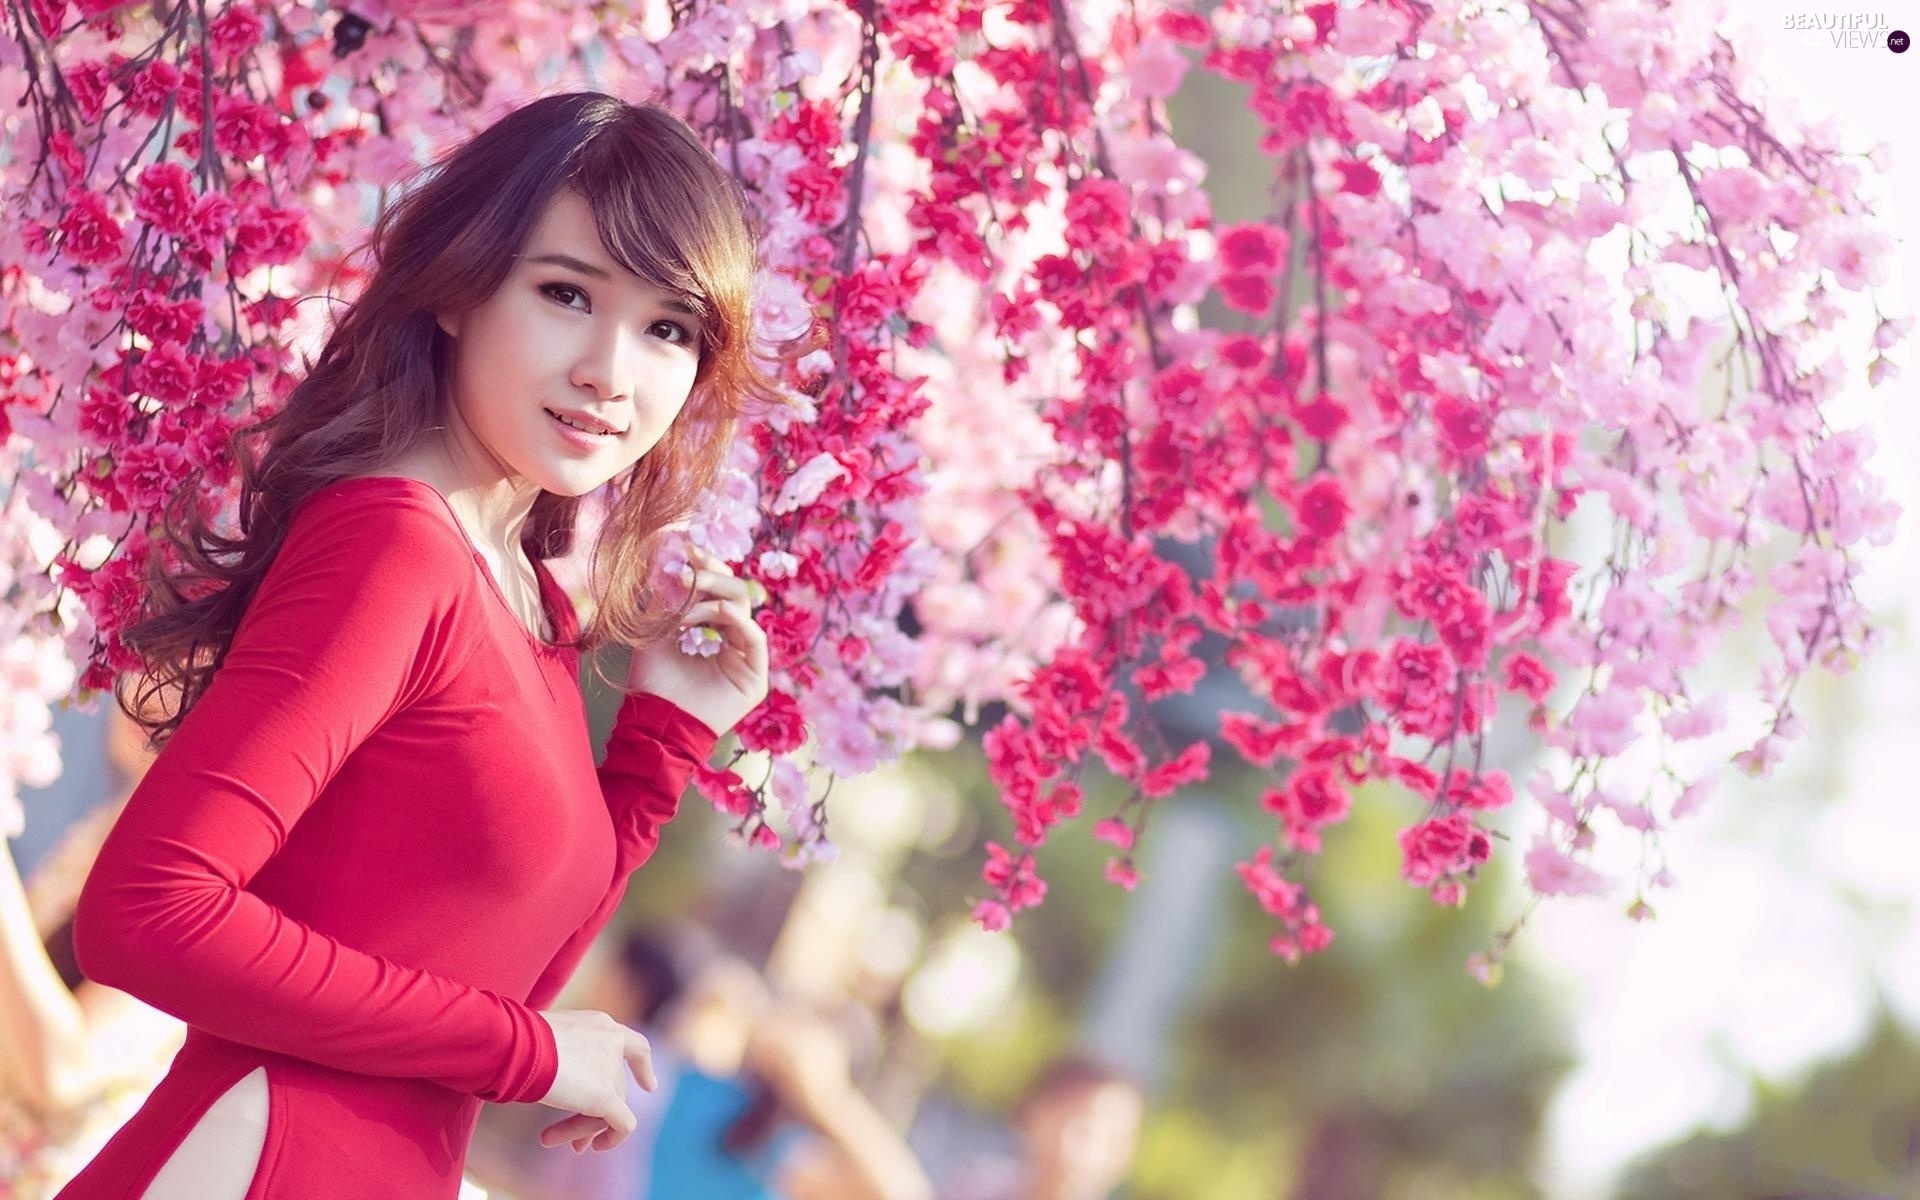 japanese girl hd wallpaper,people in nature,pink,spring,skin,beauty